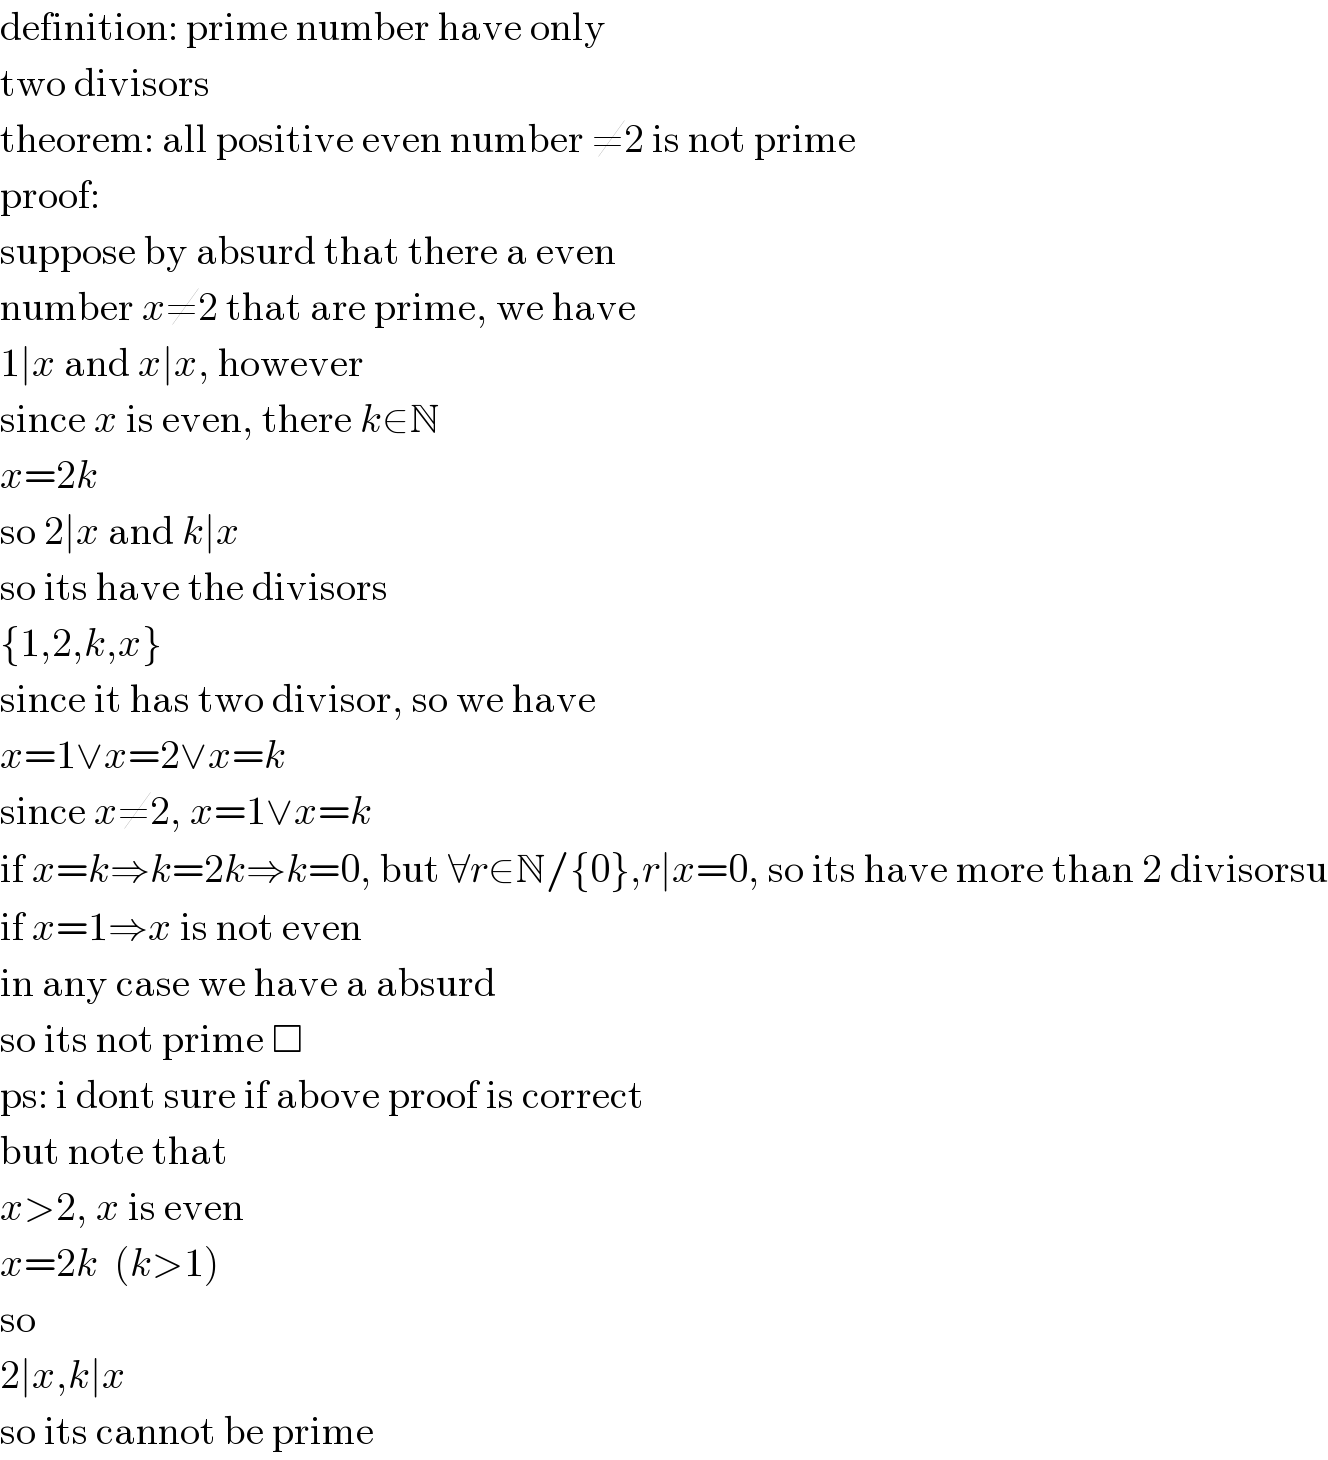 definition: prime number have only  two divisors  theorem: all positive even number ≠2 is not prime  proof:  suppose by absurd that there a even  number x≠2 that are prime, we have  1∣x and x∣x, however  since x is even, there k∈N  x=2k  so 2∣x and k∣x  so its have the divisors  {1,2,k,x}  since it has two divisor, so we have  x=1∨x=2∨x=k  since x≠2, x=1∨x=k  if x=k⇒k=2k⇒k=0, but ∀r∈N/{0},r∣x=0, so its have more than 2 divisorsu  if x=1⇒x is not even  in any case we have a absurd  so its not prime □  ps: i dont sure if above proof is correct  but note that  x>2, x is even  x=2k  (k>1)  so  2∣x,k∣x  so its cannot be prime  